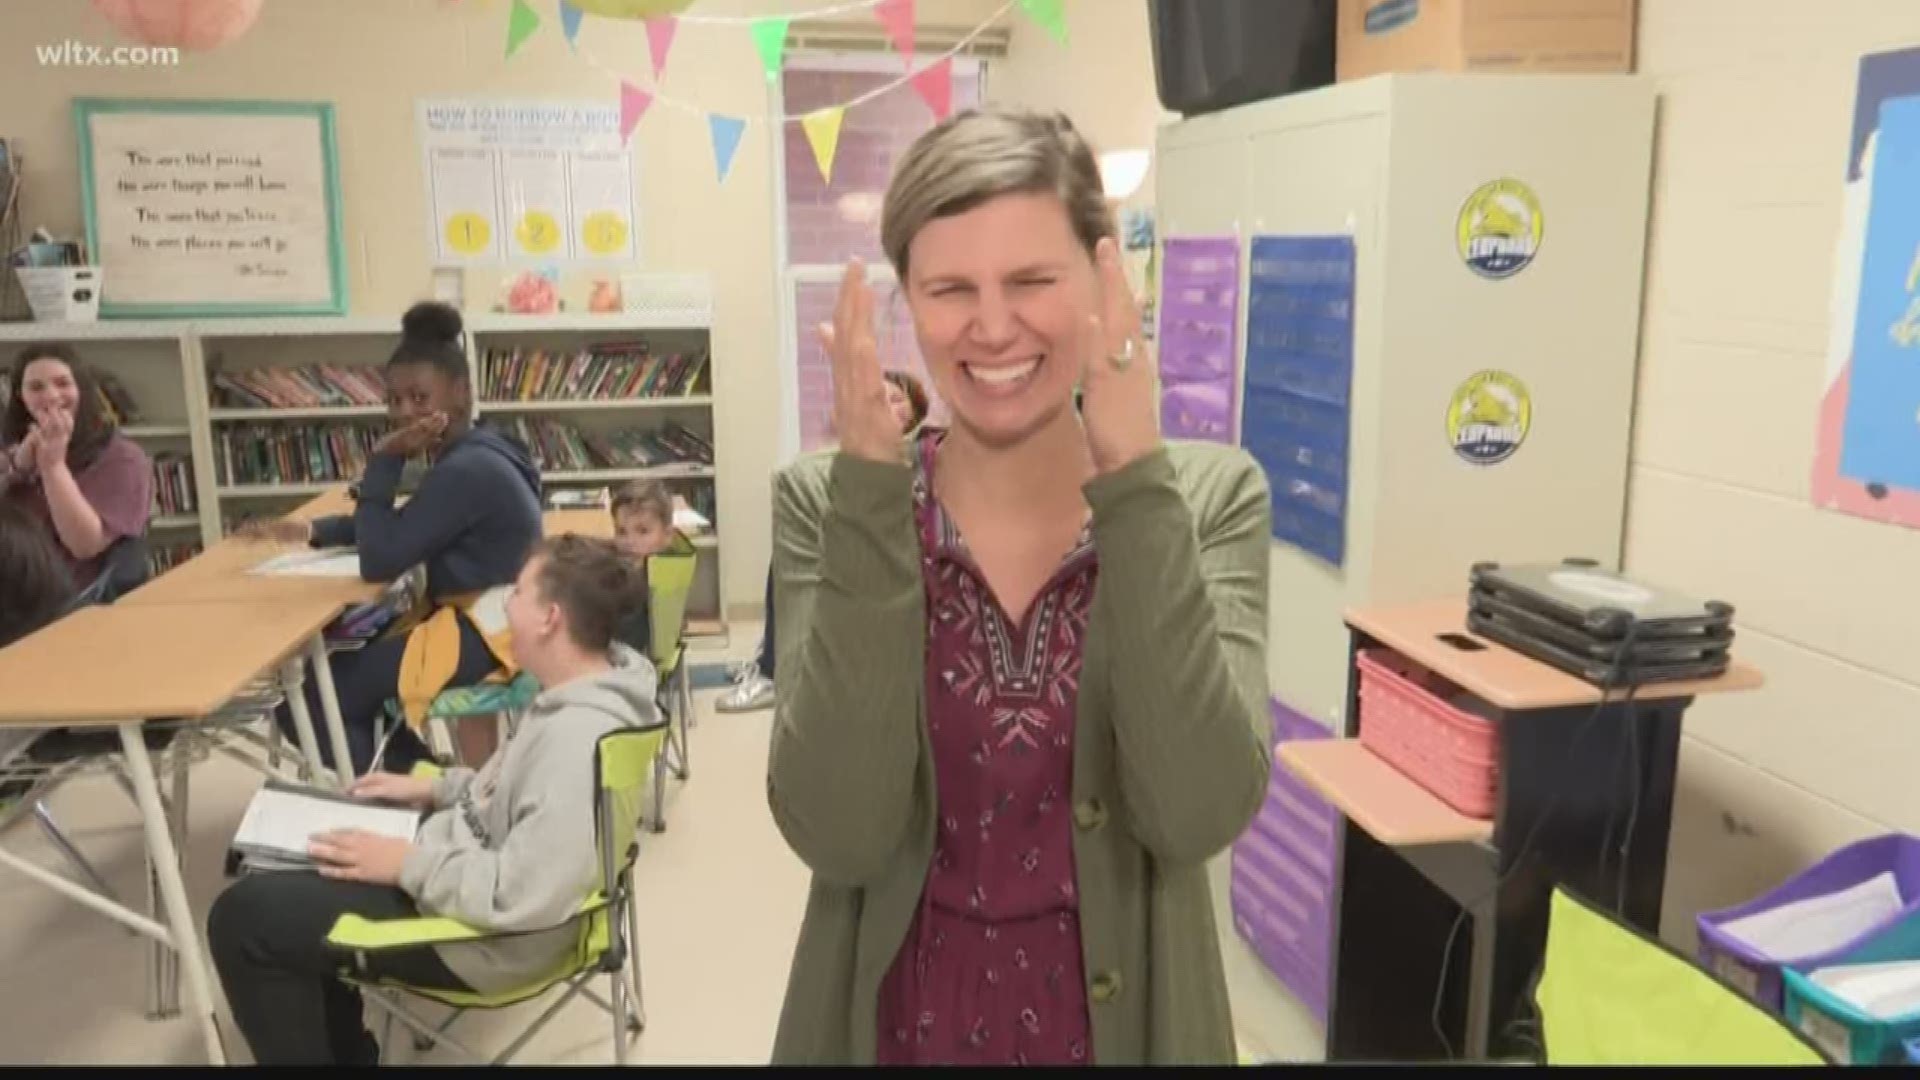 She is a teacher at Lugoff-Elgin middle school and according to the students she "makes learning fun."